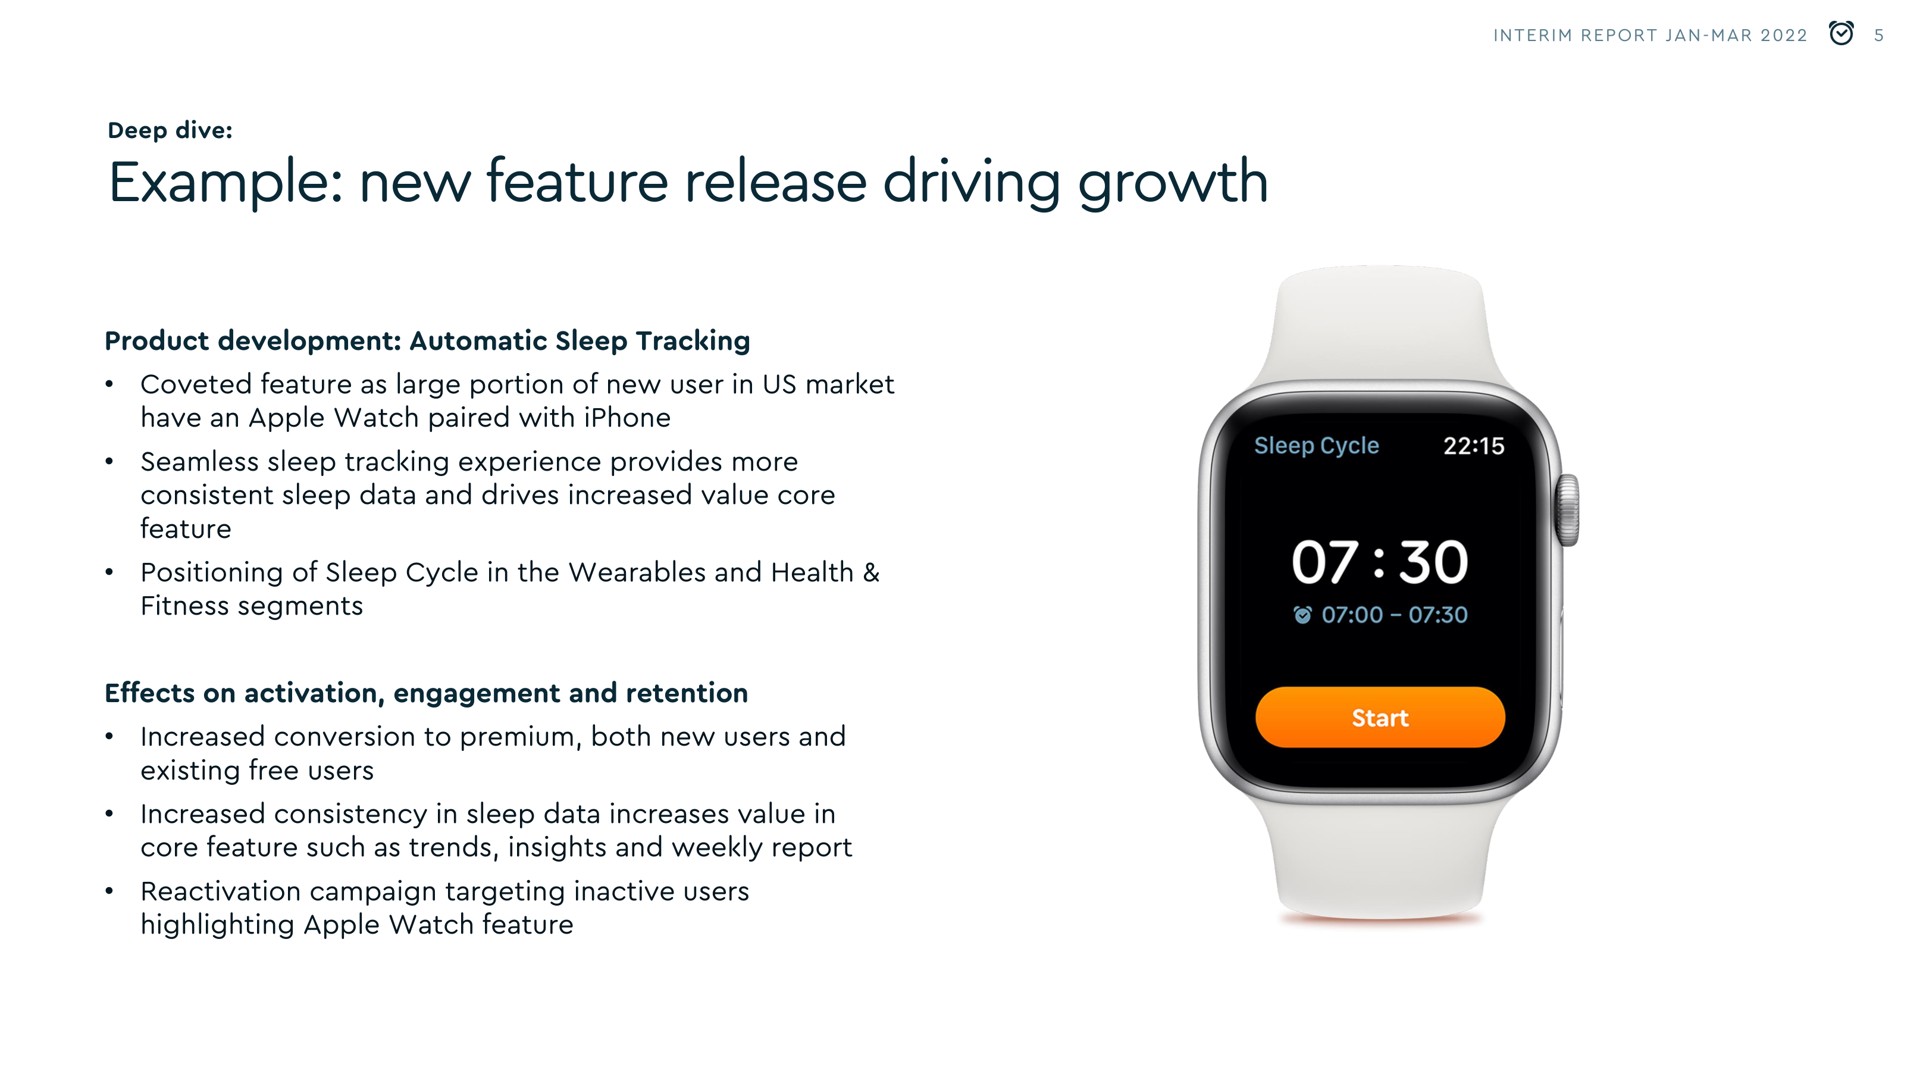 deep dive example new feature release driving growth product development automatic sleep tracking coveted feature as large portion of new user in us market have an apple watch paired with seamless sleep tracking experience provides more consistent sleep data and drives increased value core feature positioning of sleep cycle in the wearables and health fitness segments effects on activation engagement and retention increased conversion to premium both new users and existing free users increased consistency in sleep data increases value in core feature such as trends insights and weekly report reactivation campaign targeting inactive users highlighting apple watch feature interim mar | Sleep Cycle